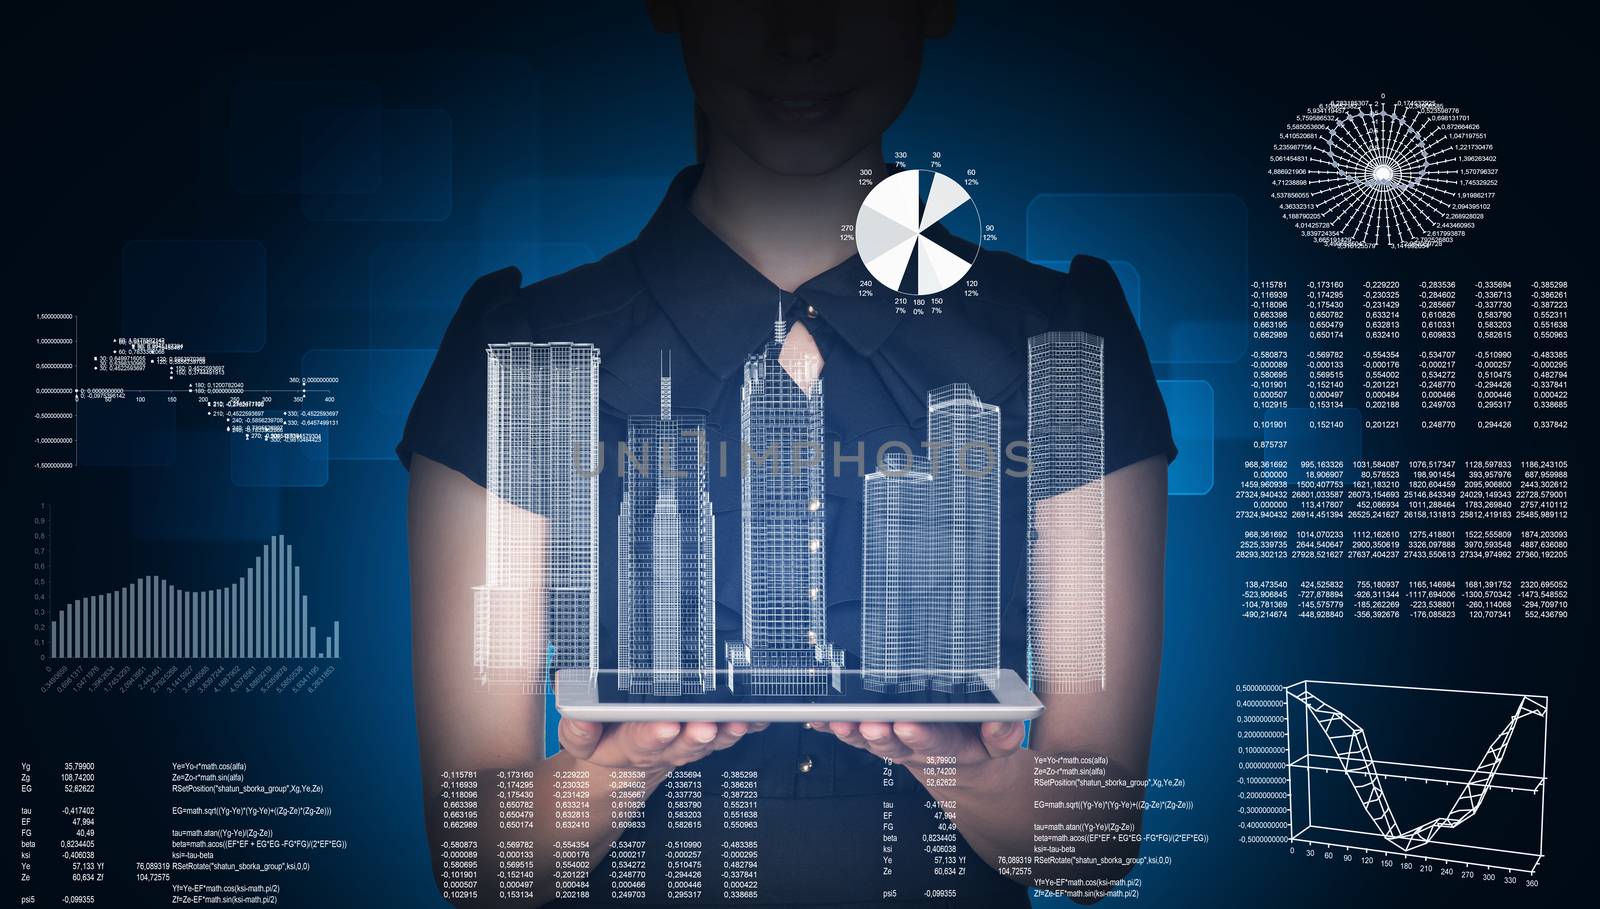 Businesswoman with tablet and 3d city model on abstract blue background